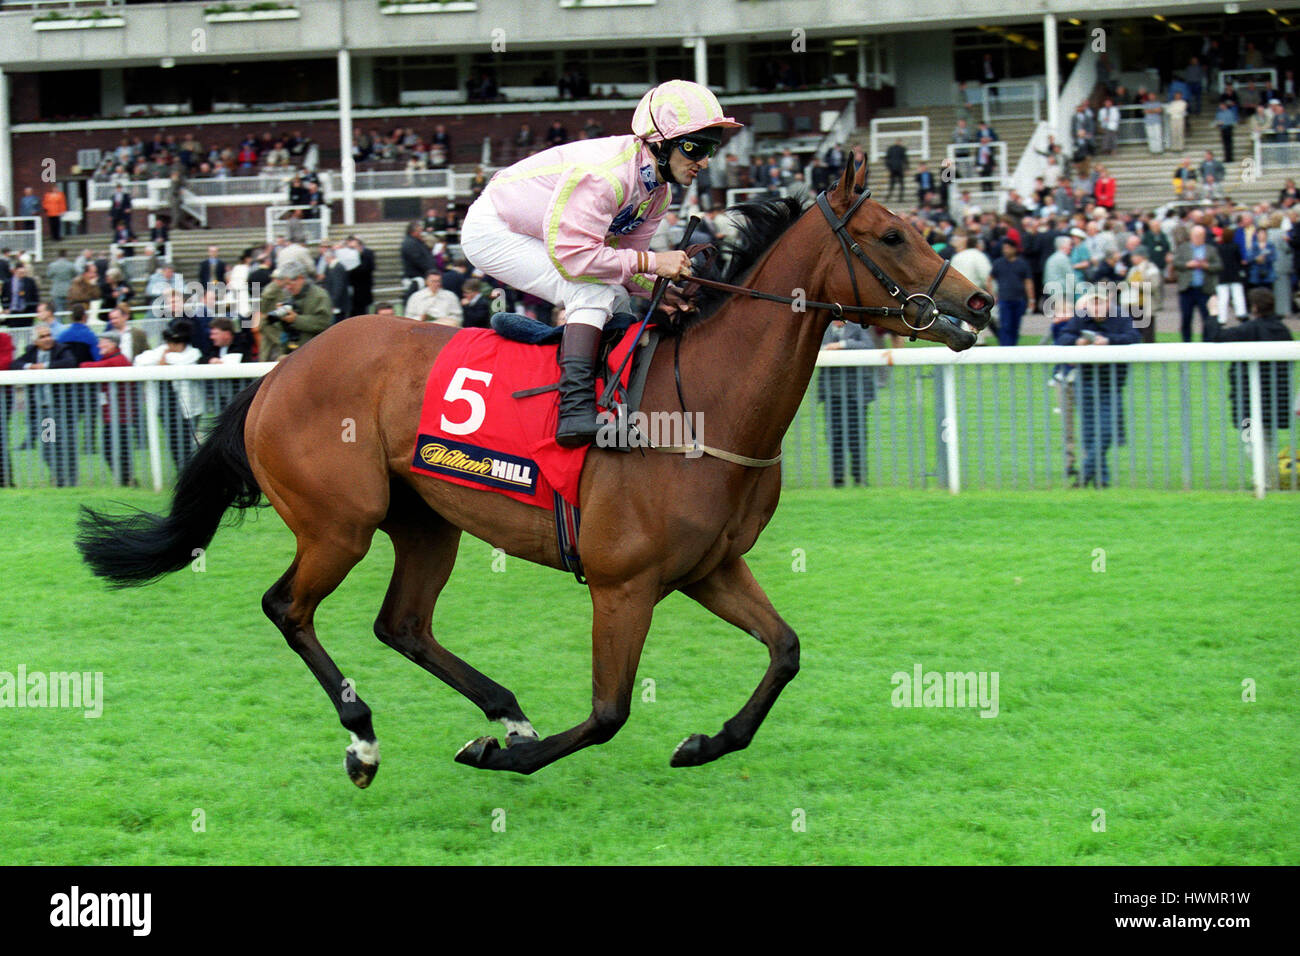 ROUGE ETOILE RIDDEN BY T.SPARKE 13 May 1999 Stock Photo